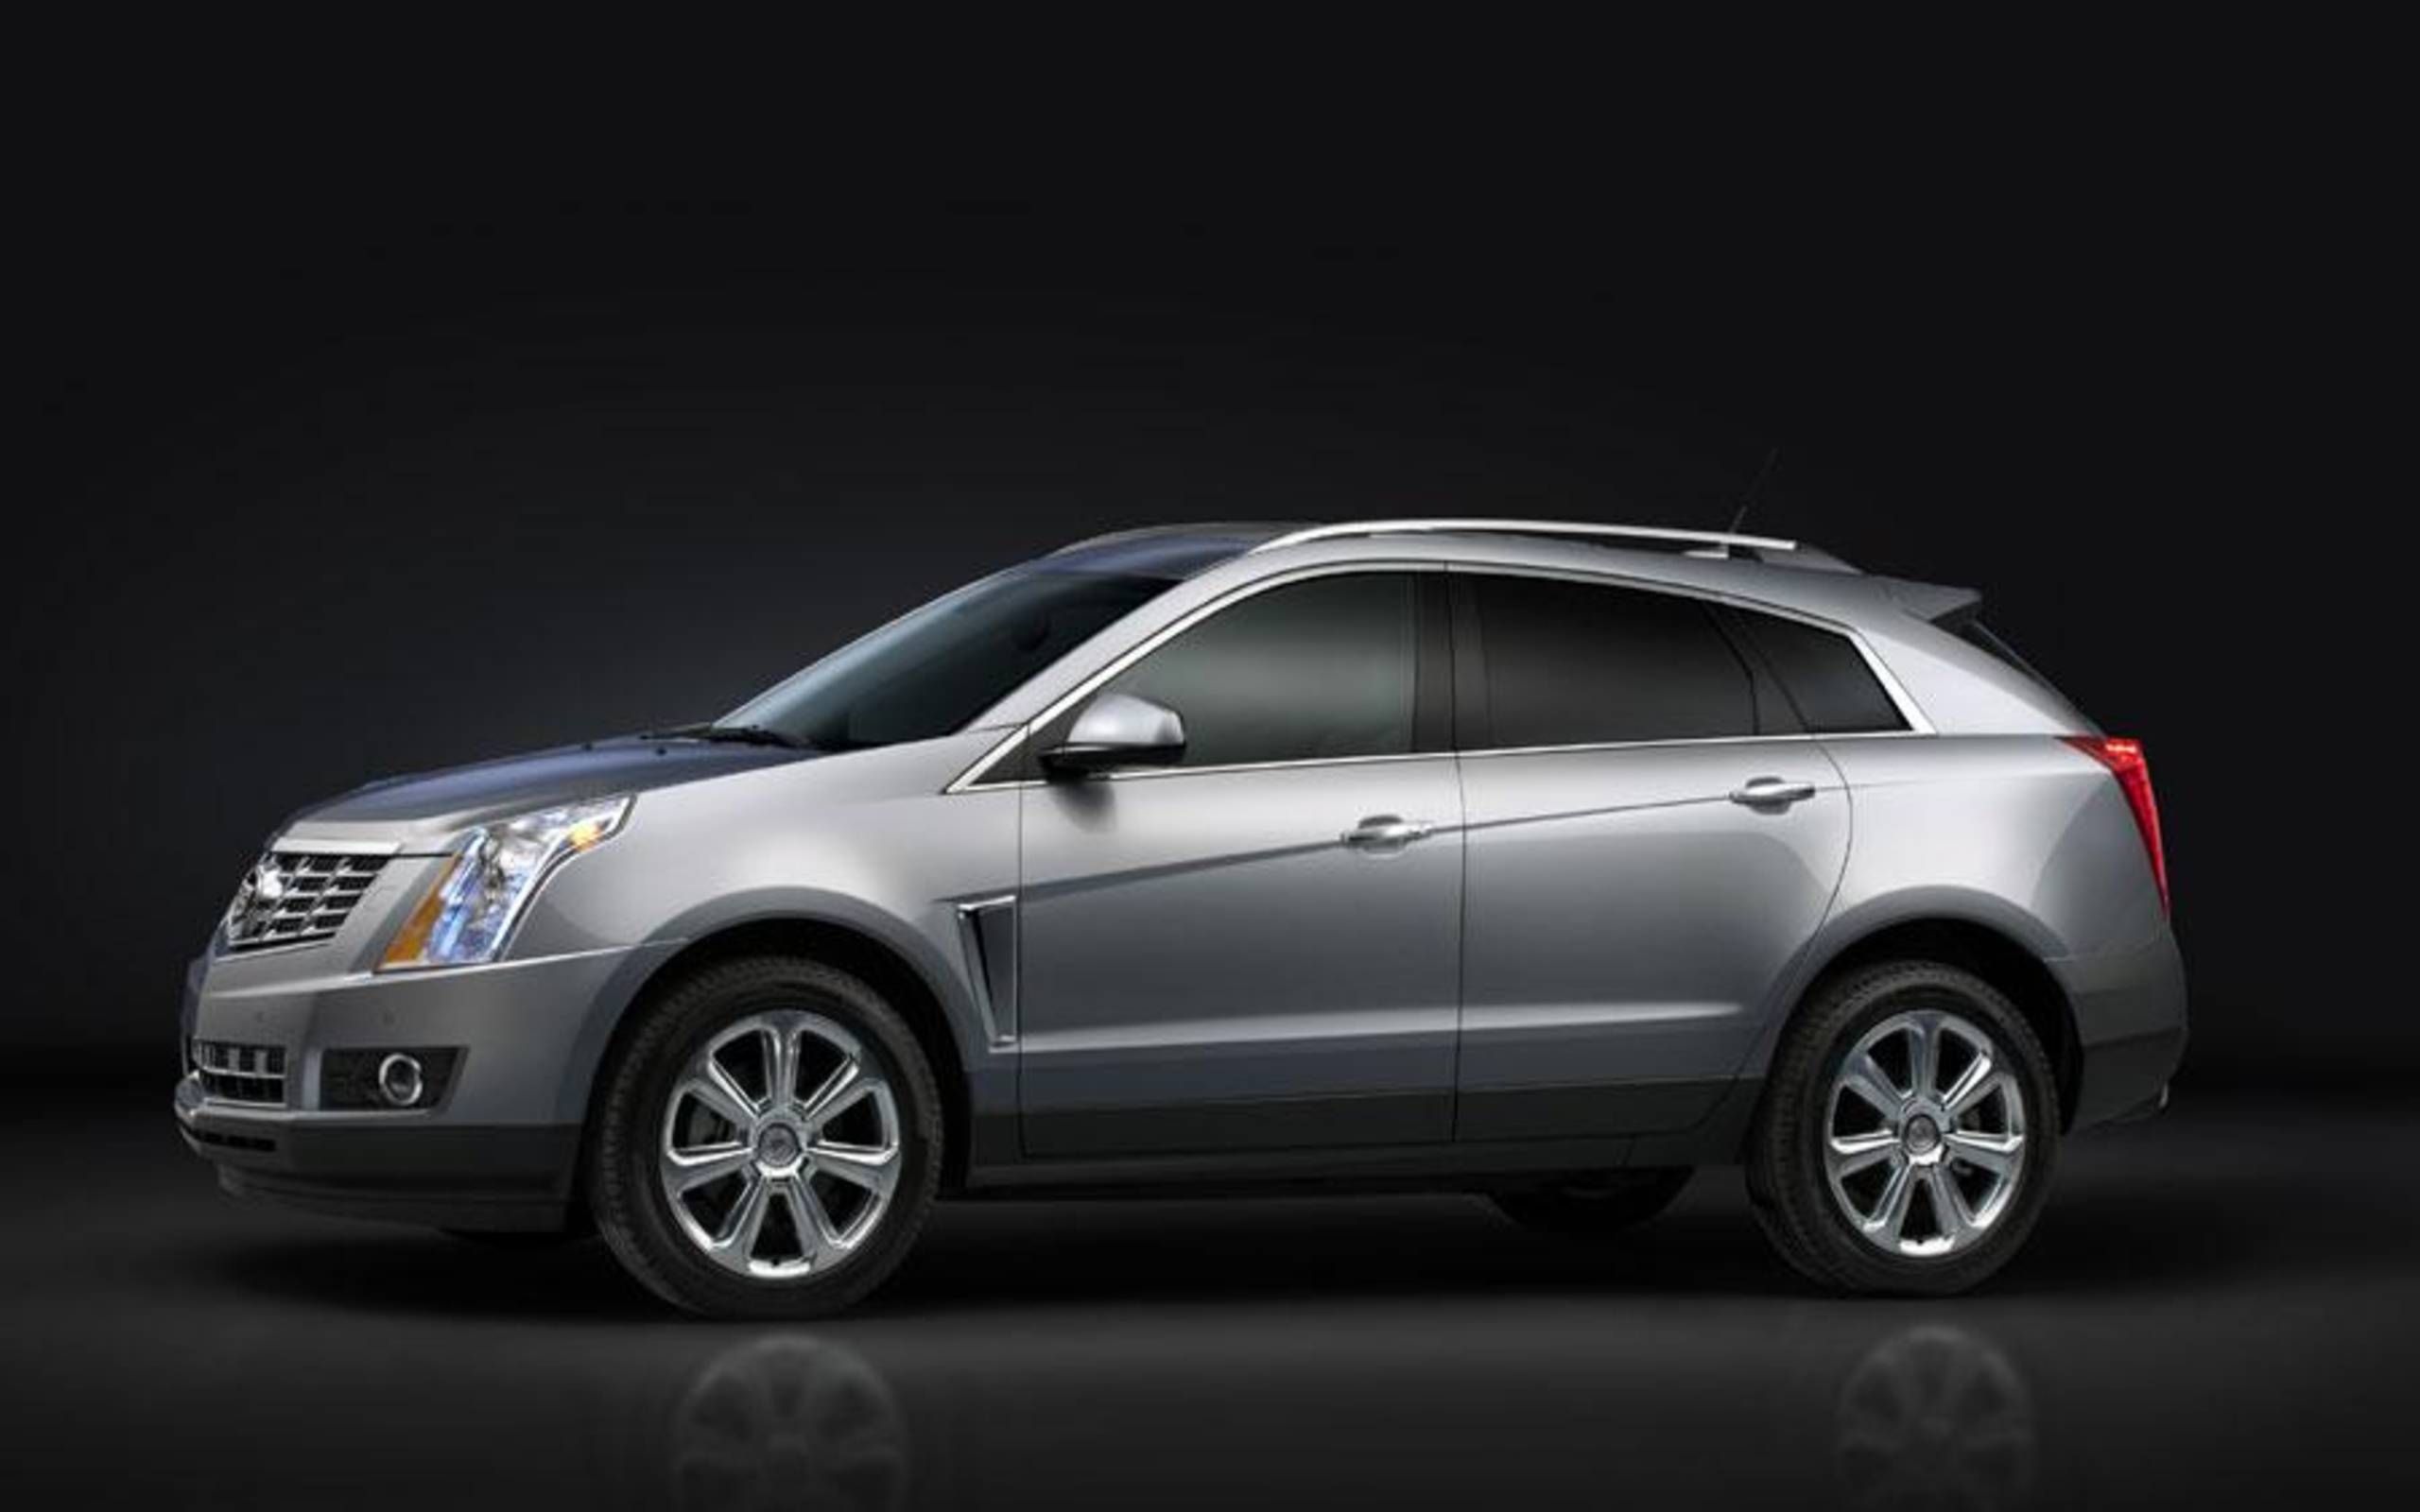 2014 Cadillac SRX Premium Collection review notes